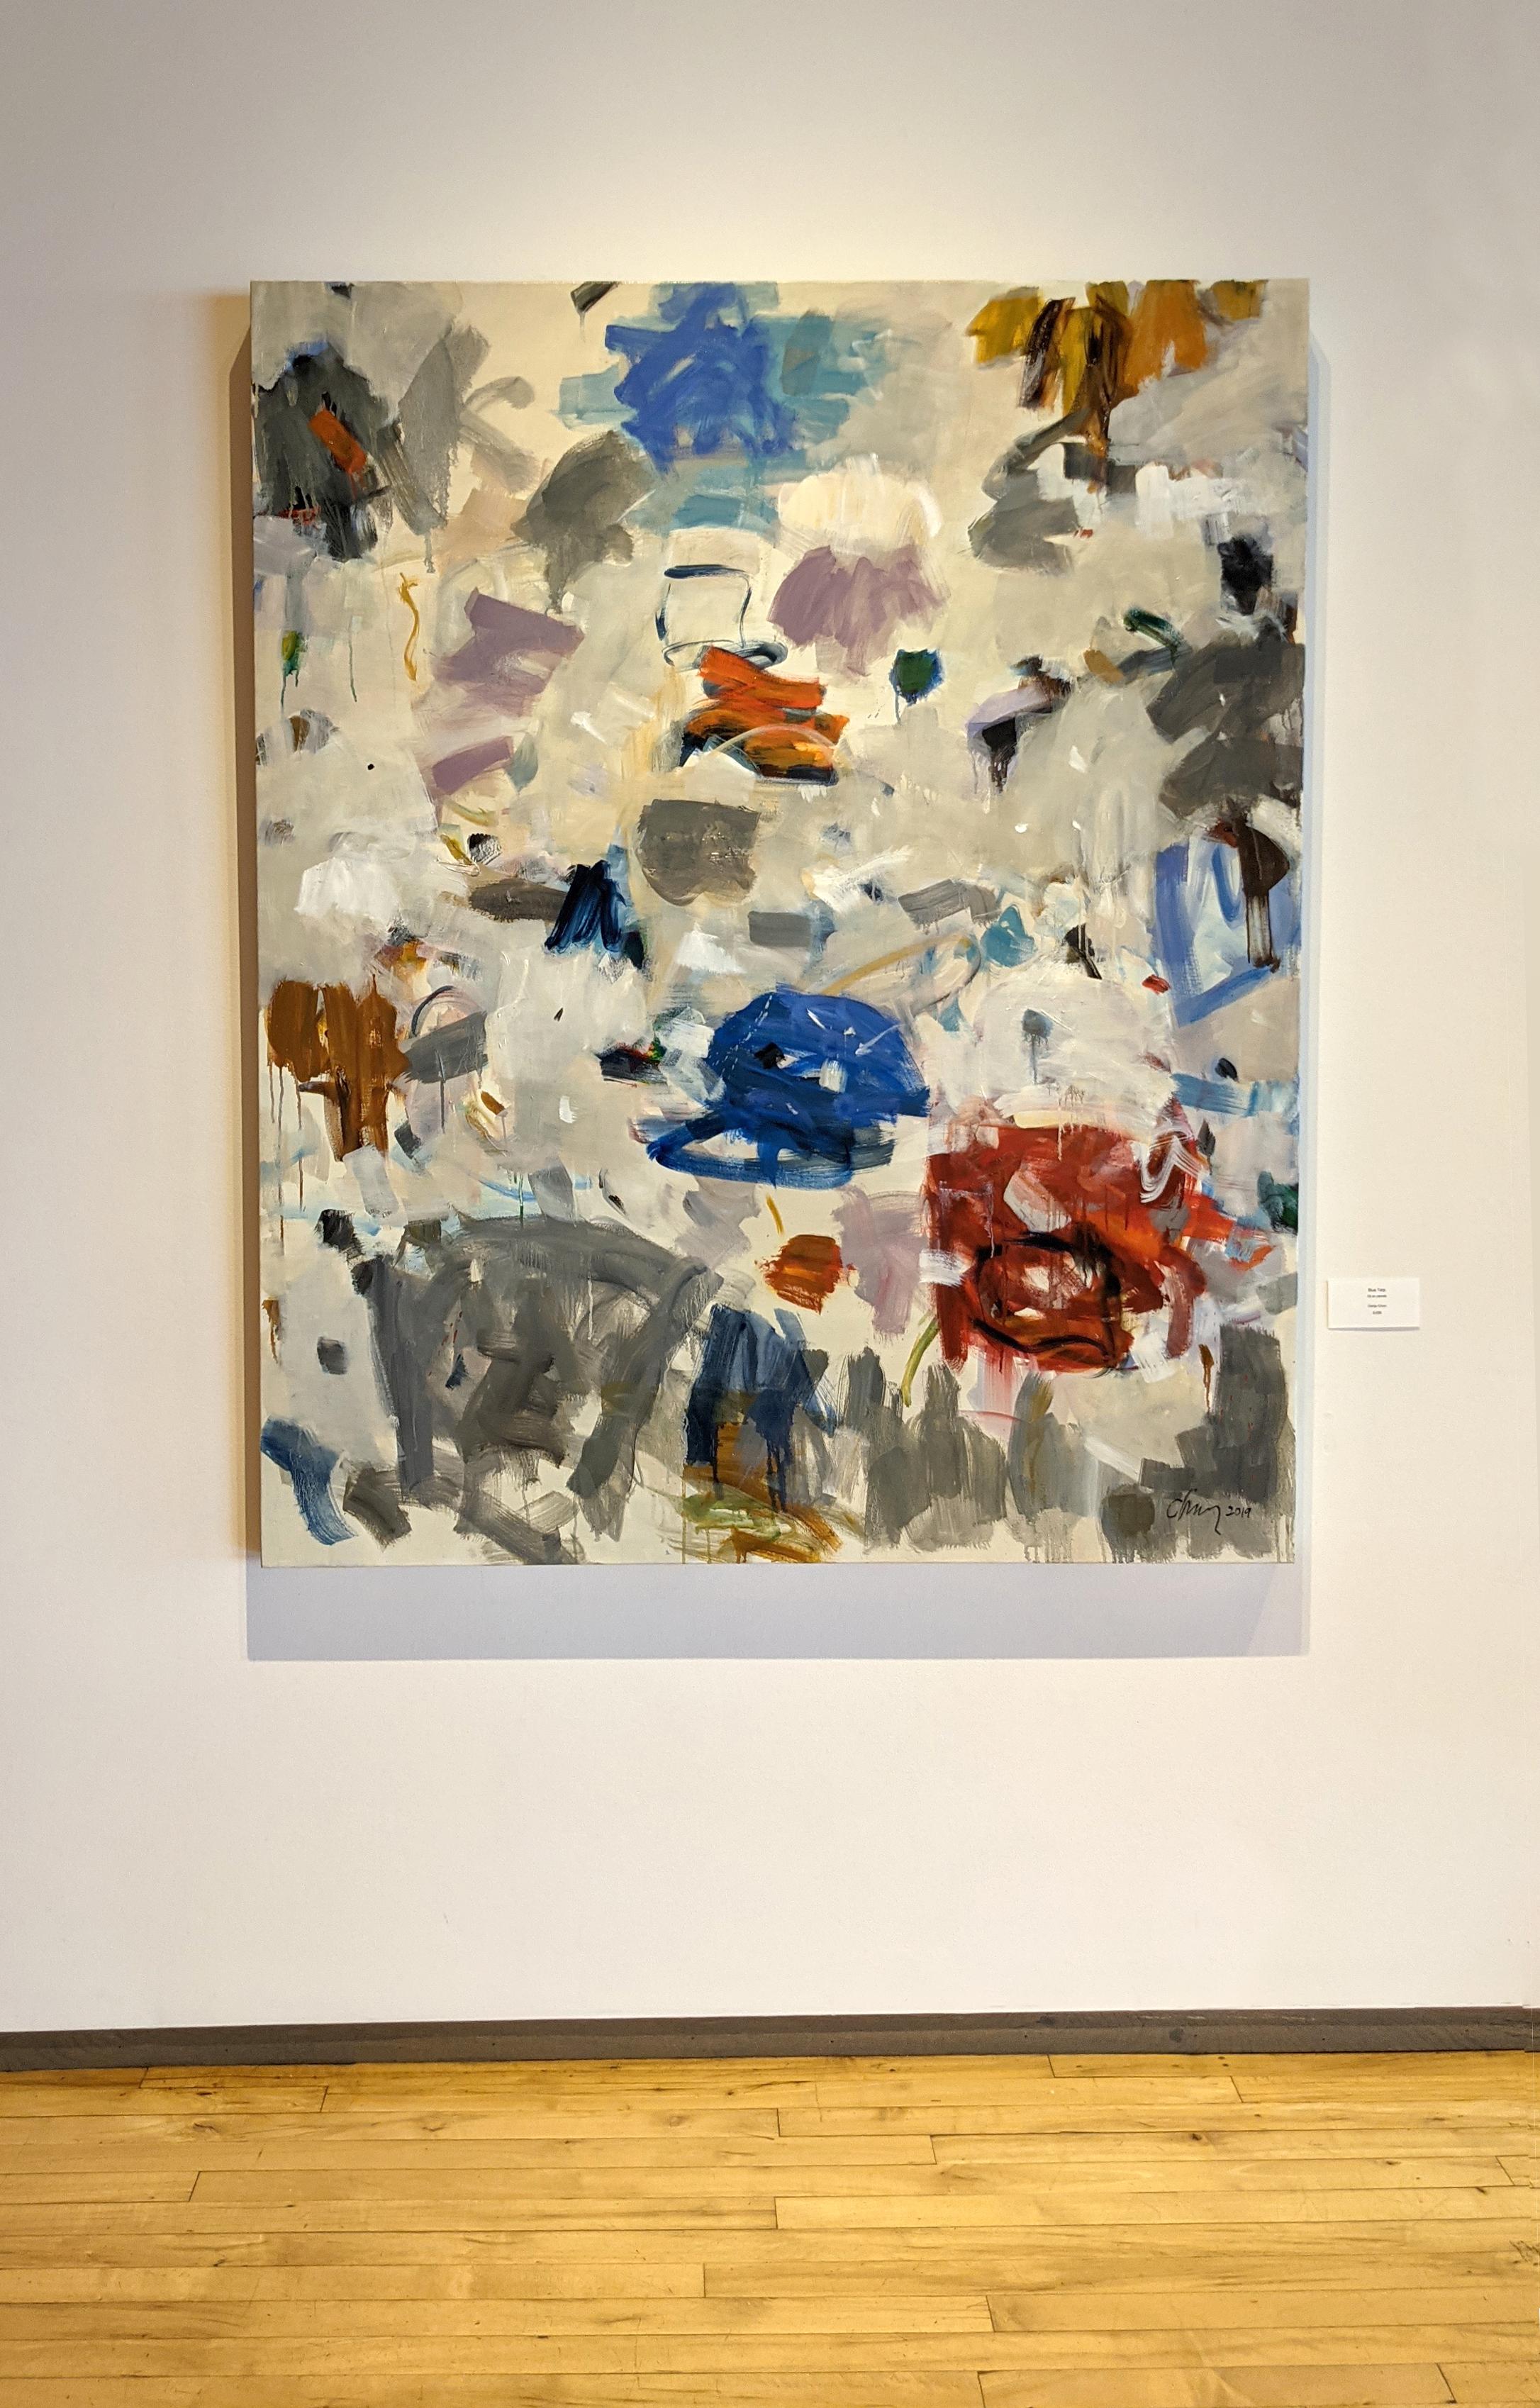 Blue Tarp, oil on canvas, 60 x 50 in. (unframed, gallery-wrapped canvas).

Oonju Chun’s large abstract expressionist paintings delightfully employ the basics of good, nonobjective communication. Her sophisticated gestures energetically convey a